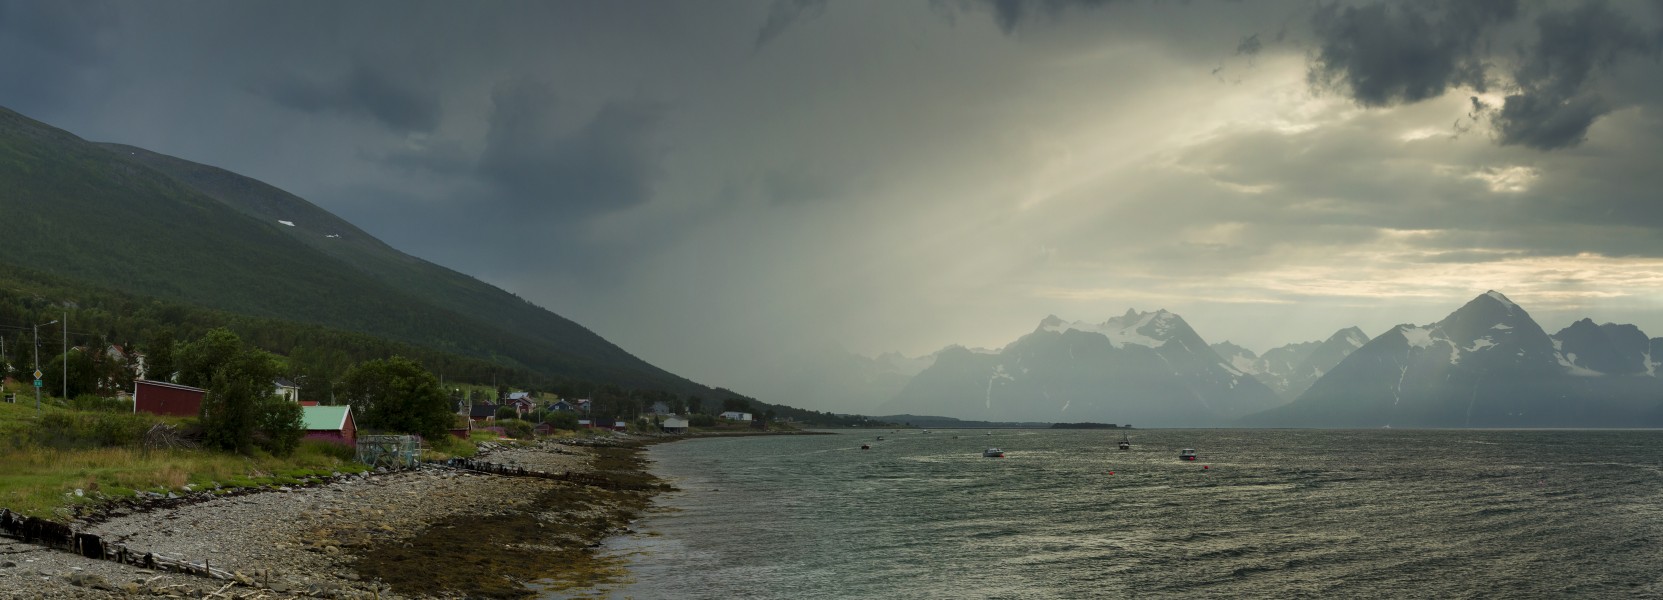 Thunderstorm is coming to Rotsundet, Nordreisa, Troms, Norway, 2014 August